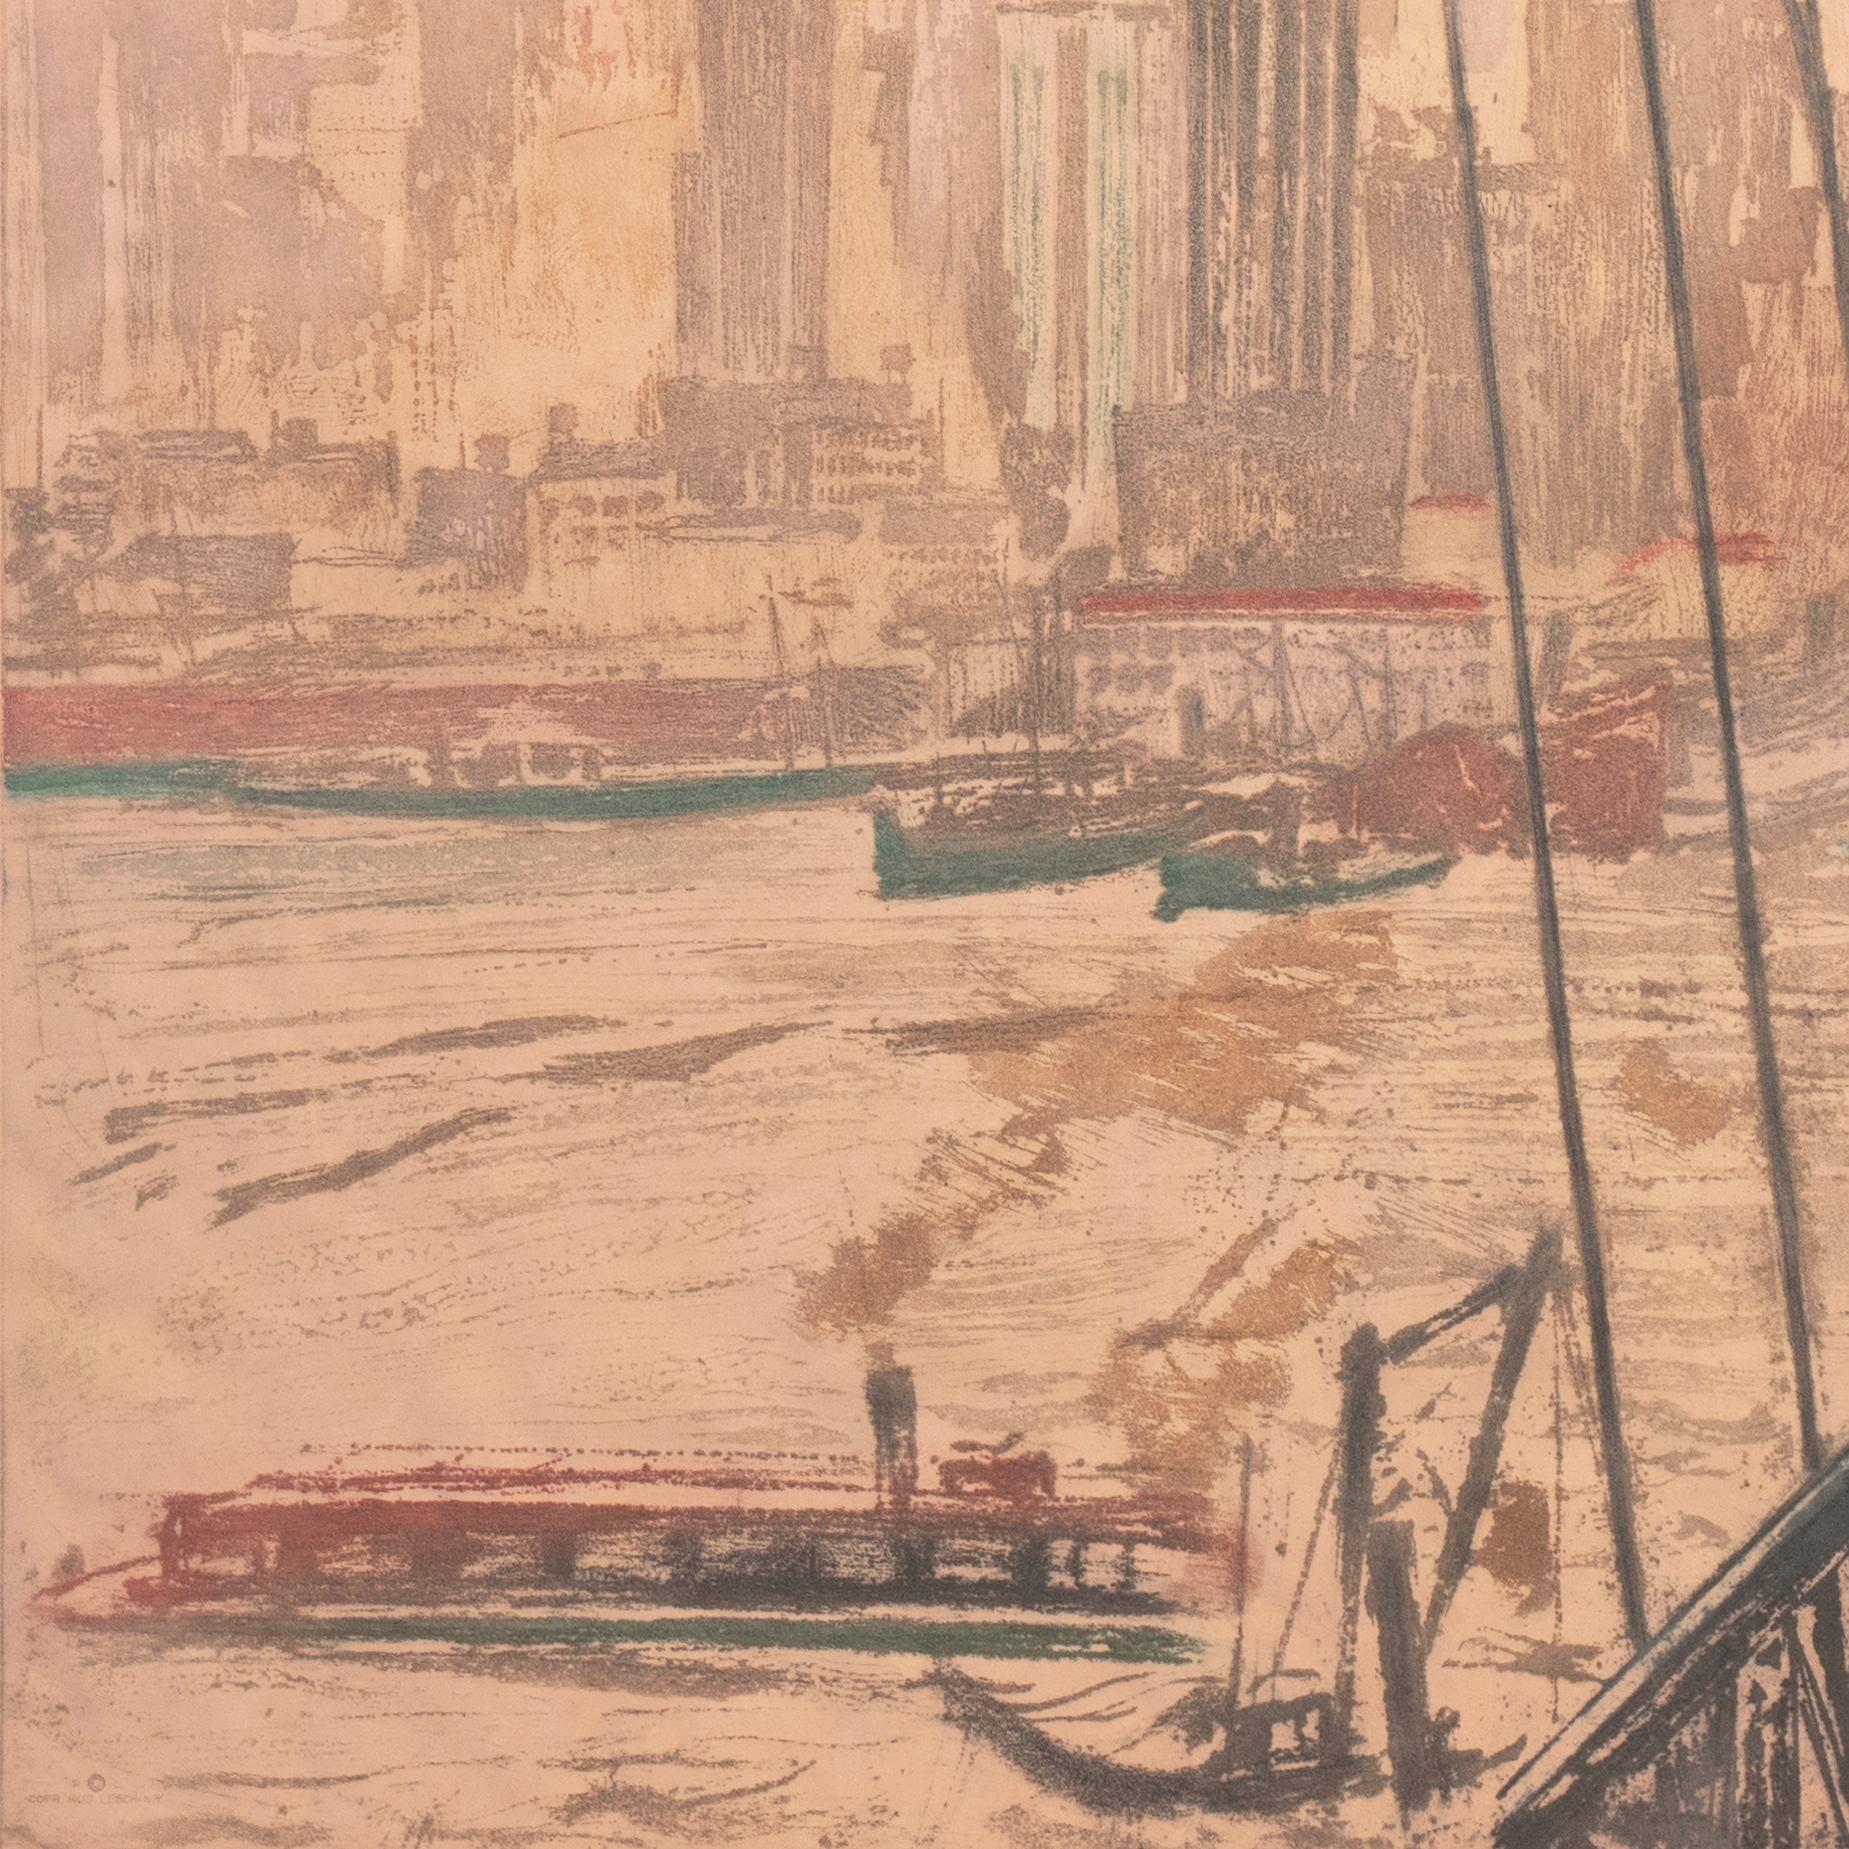 Signed lower right, 'Max Pollak' (American, 1886-1970) with number and limitation, lower center, '21/150' and titled, lower left, 'New York: East River'. Published by Rudolph Lesch and with copyright stamp  'Corp. Rud. Lesch NY' in lower left